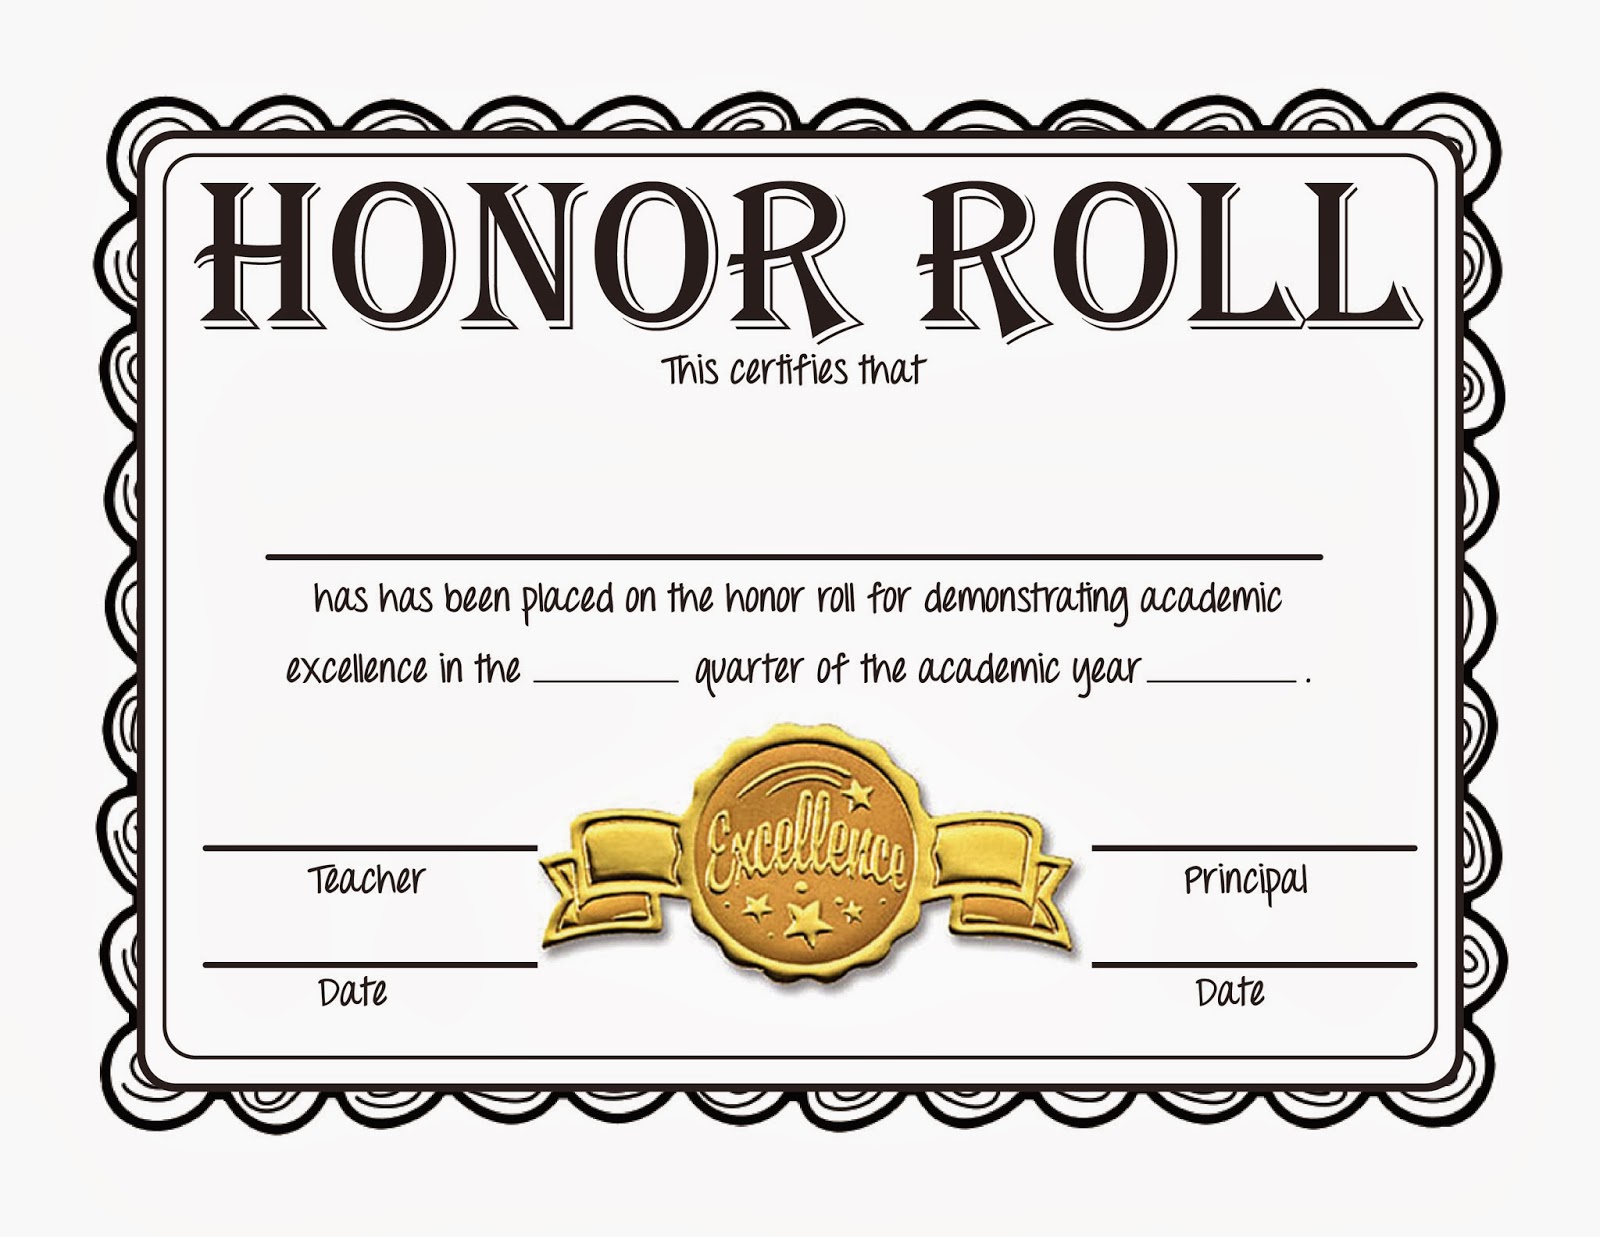 Honor Roll Certificate Free Template